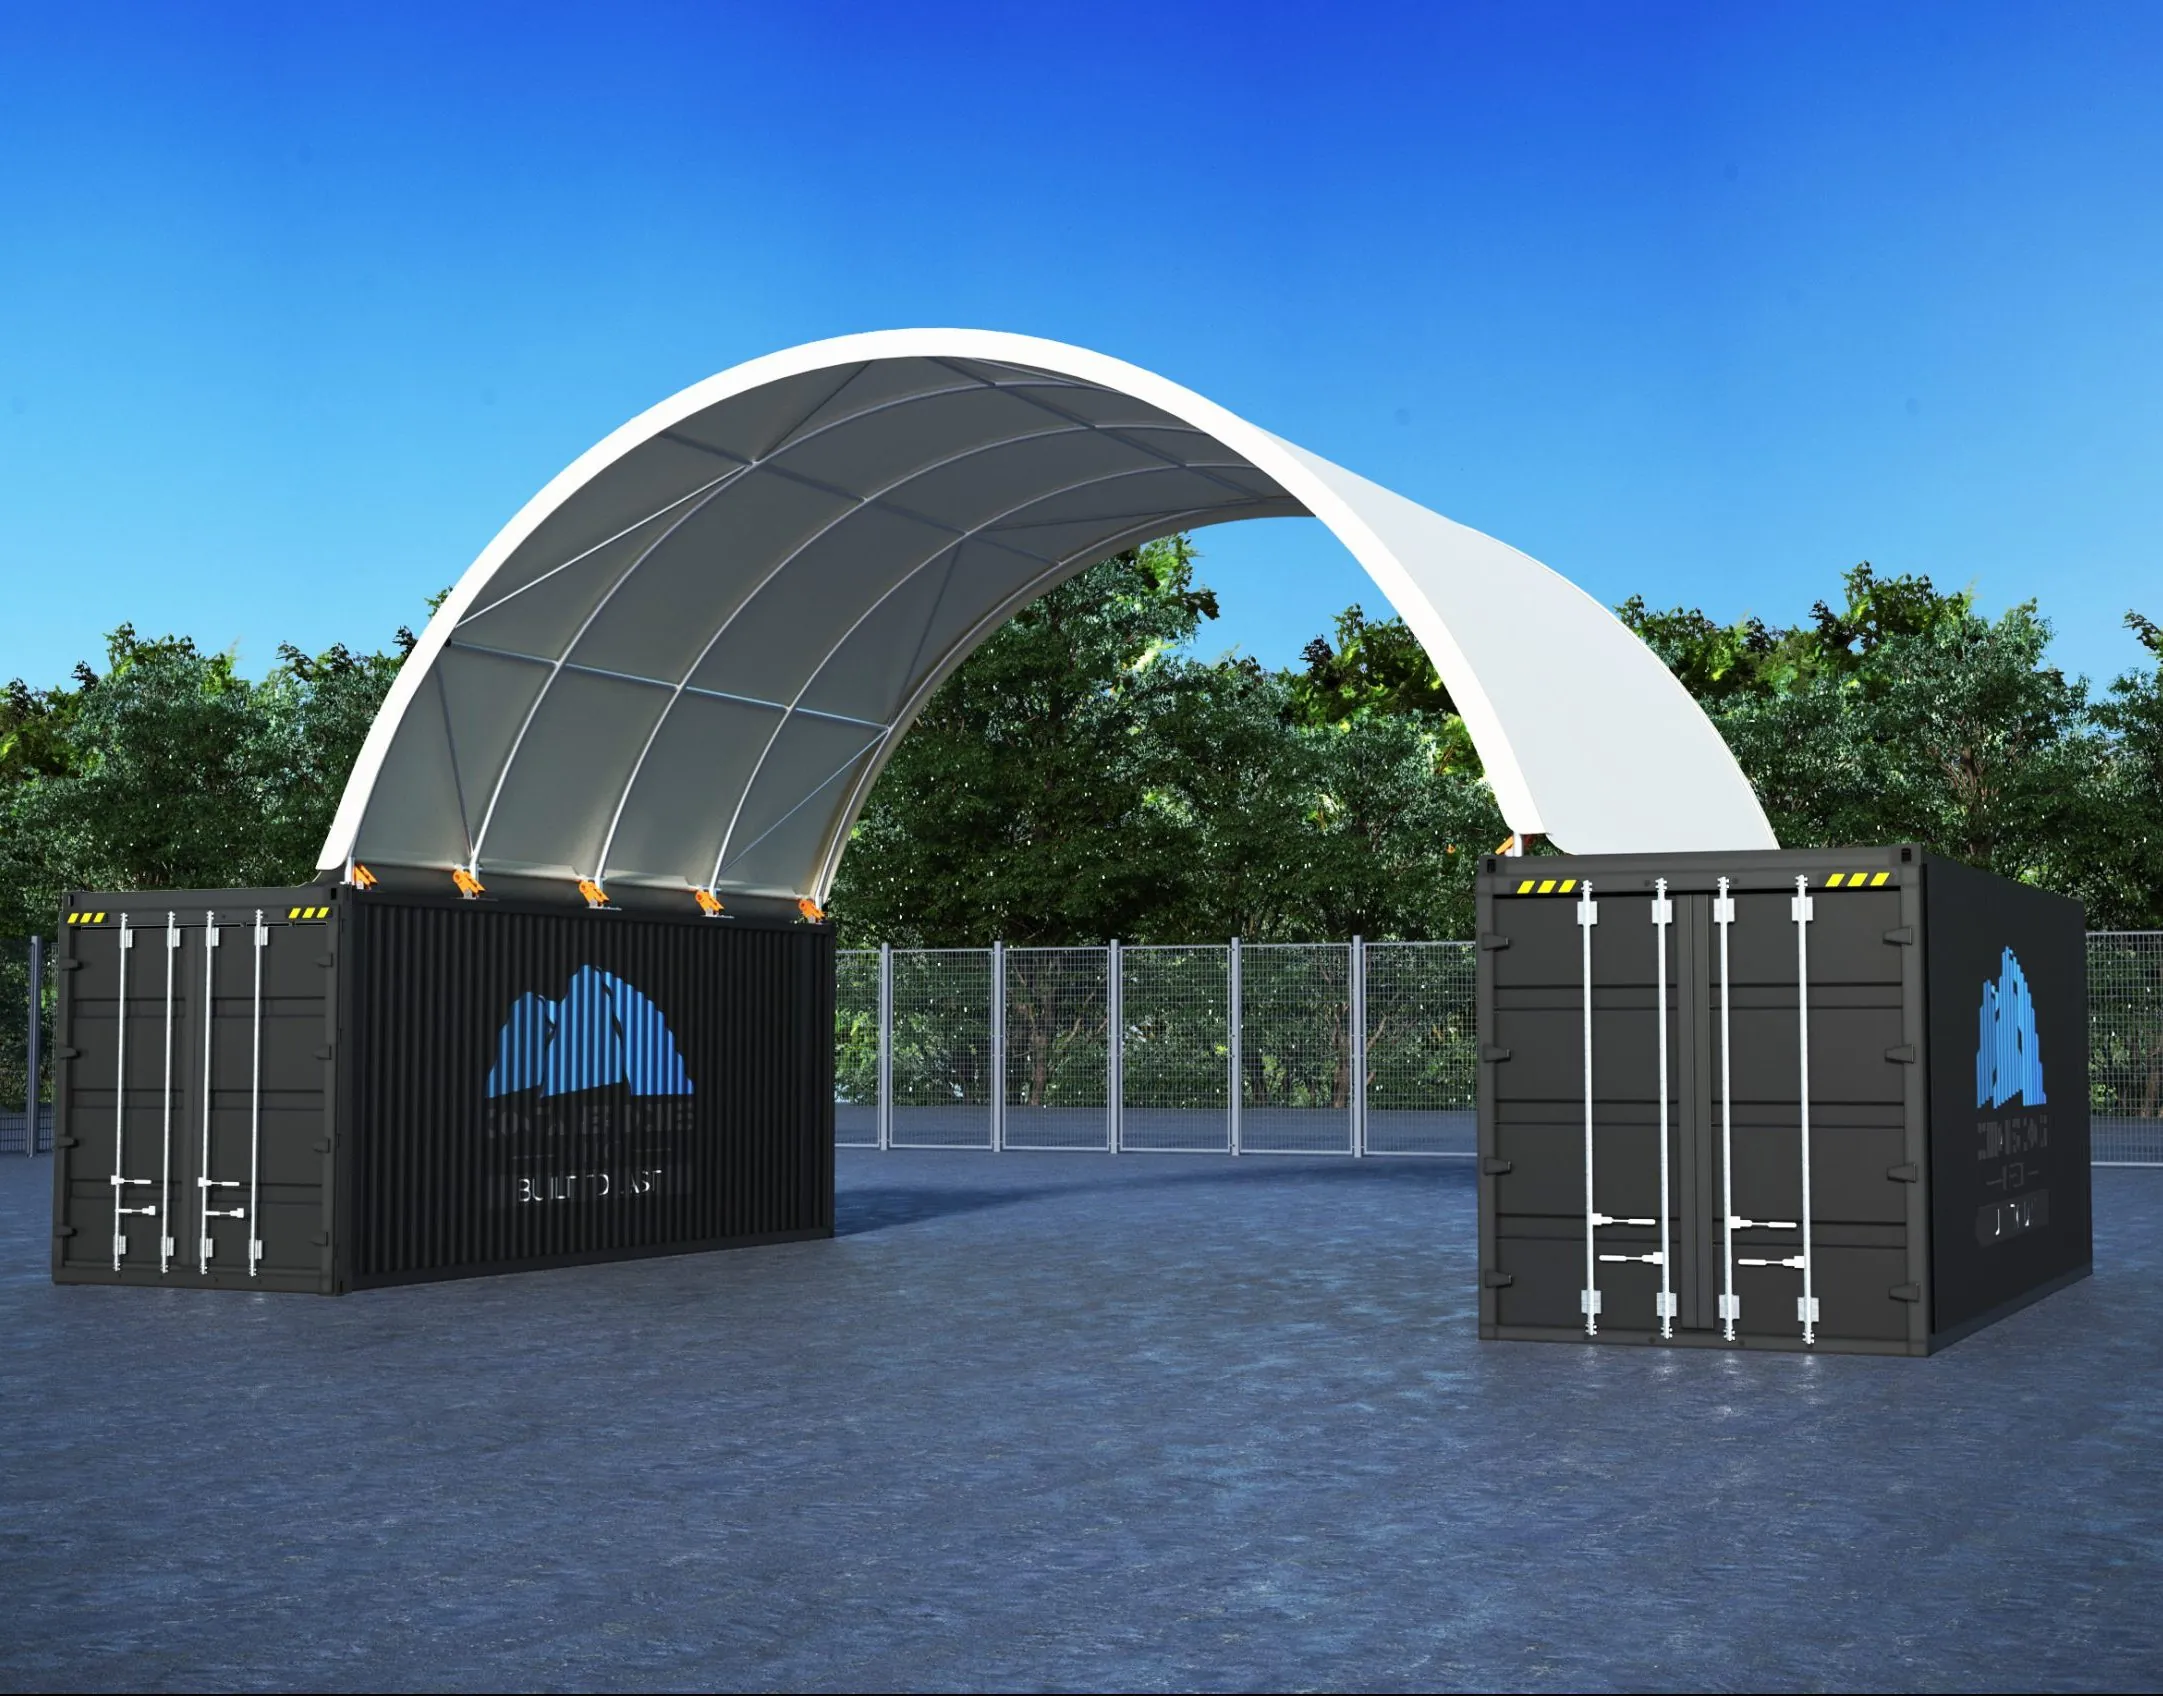 20ft container dome shelter sitting over 2 shipping containers